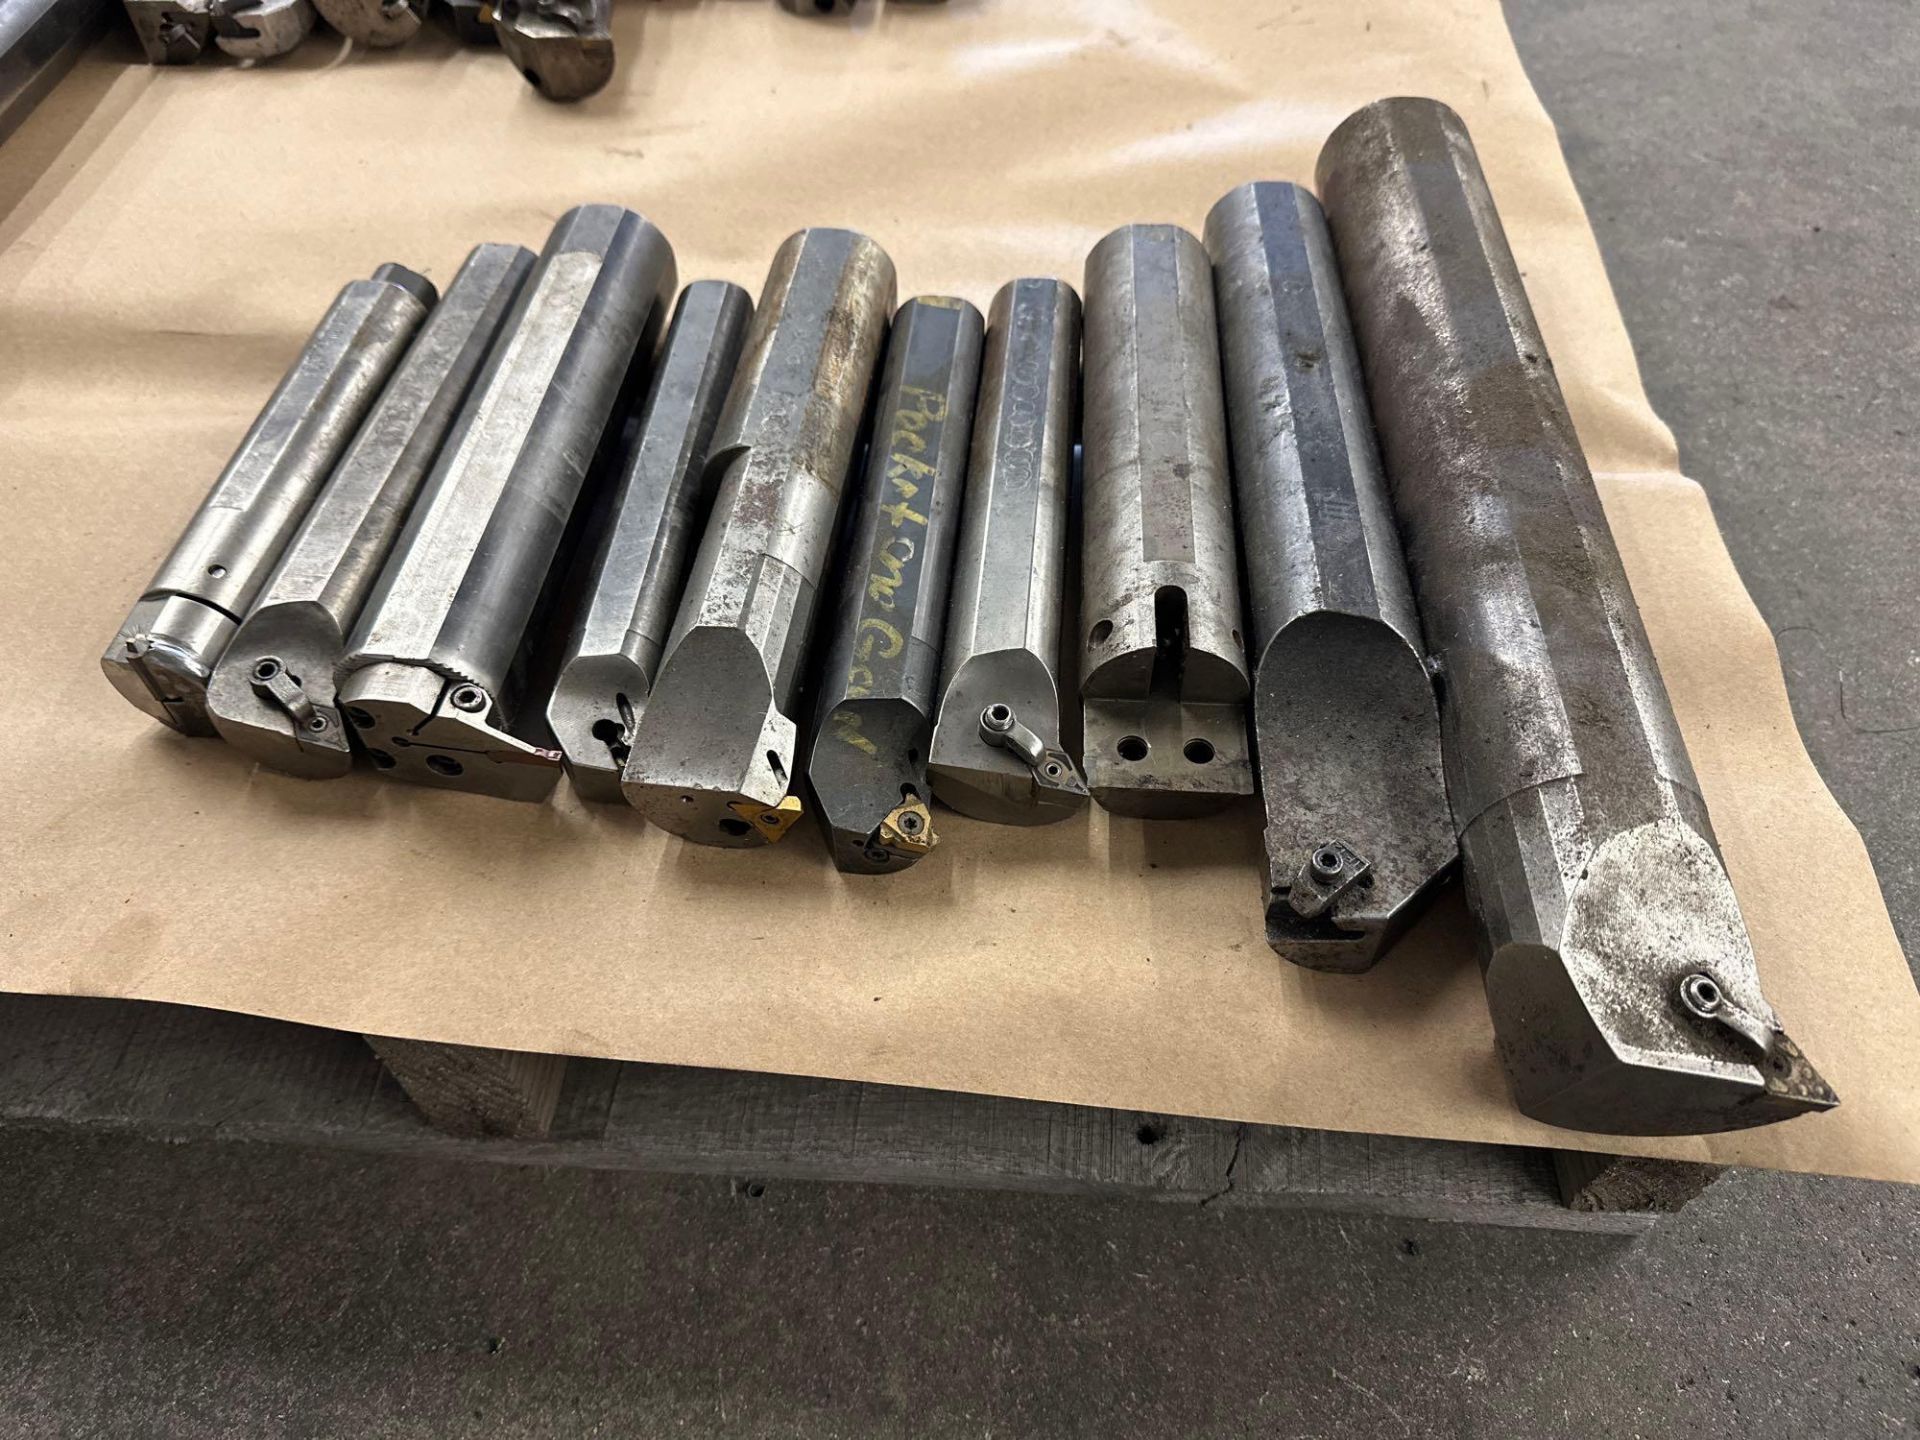 Lot of 10 Assorted Indexable Boring Bars Ranging From: 1 1/4” X 9 1/8” to 2 3/8” X 16” - Image 7 of 7